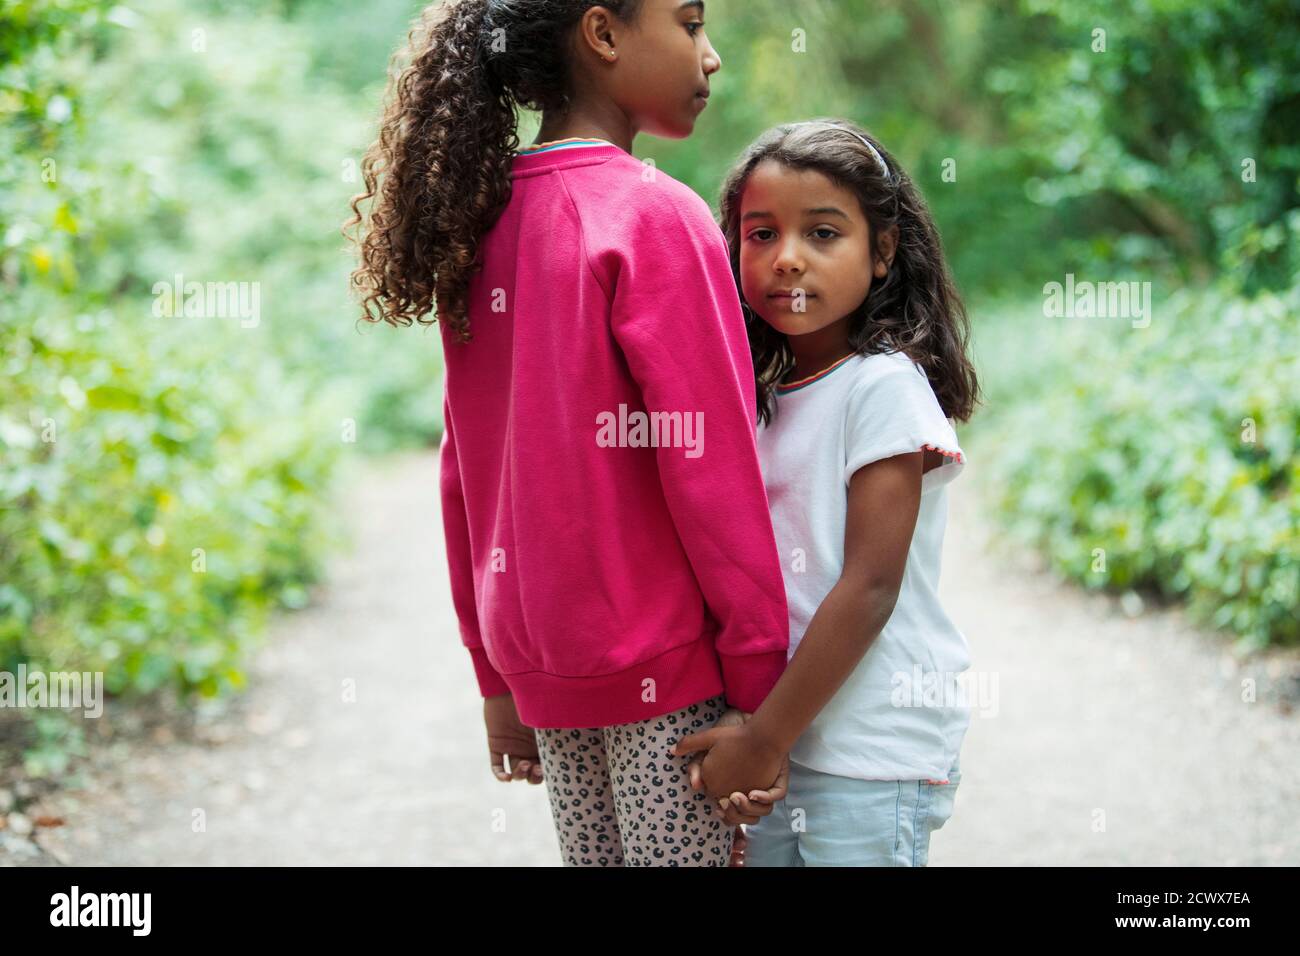 Portrait affectionate sisters holding hands on park path Stock Photo